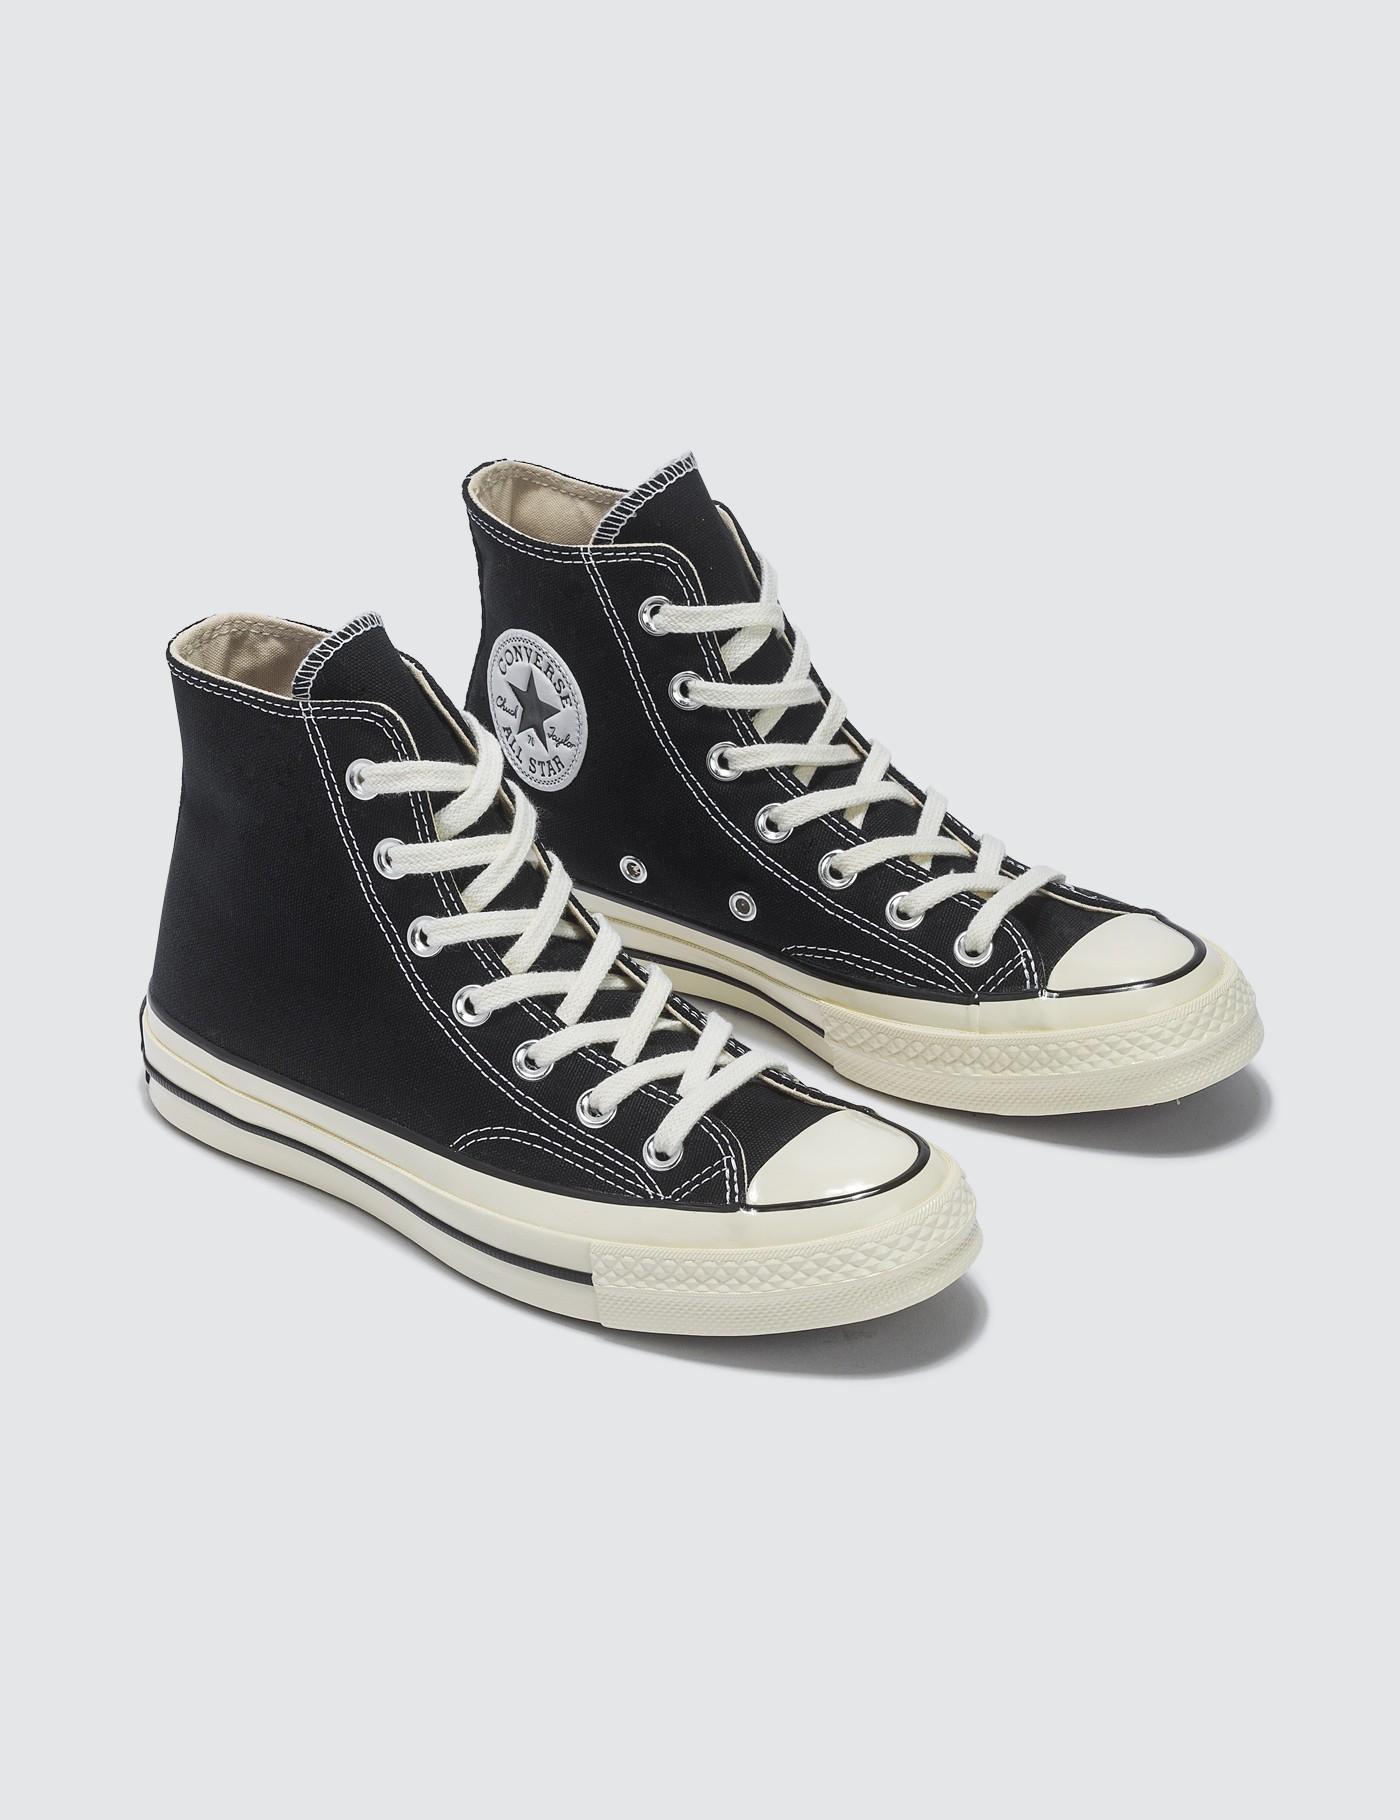 Converse Canvas Chuck 70 in Black for Men - Lyst